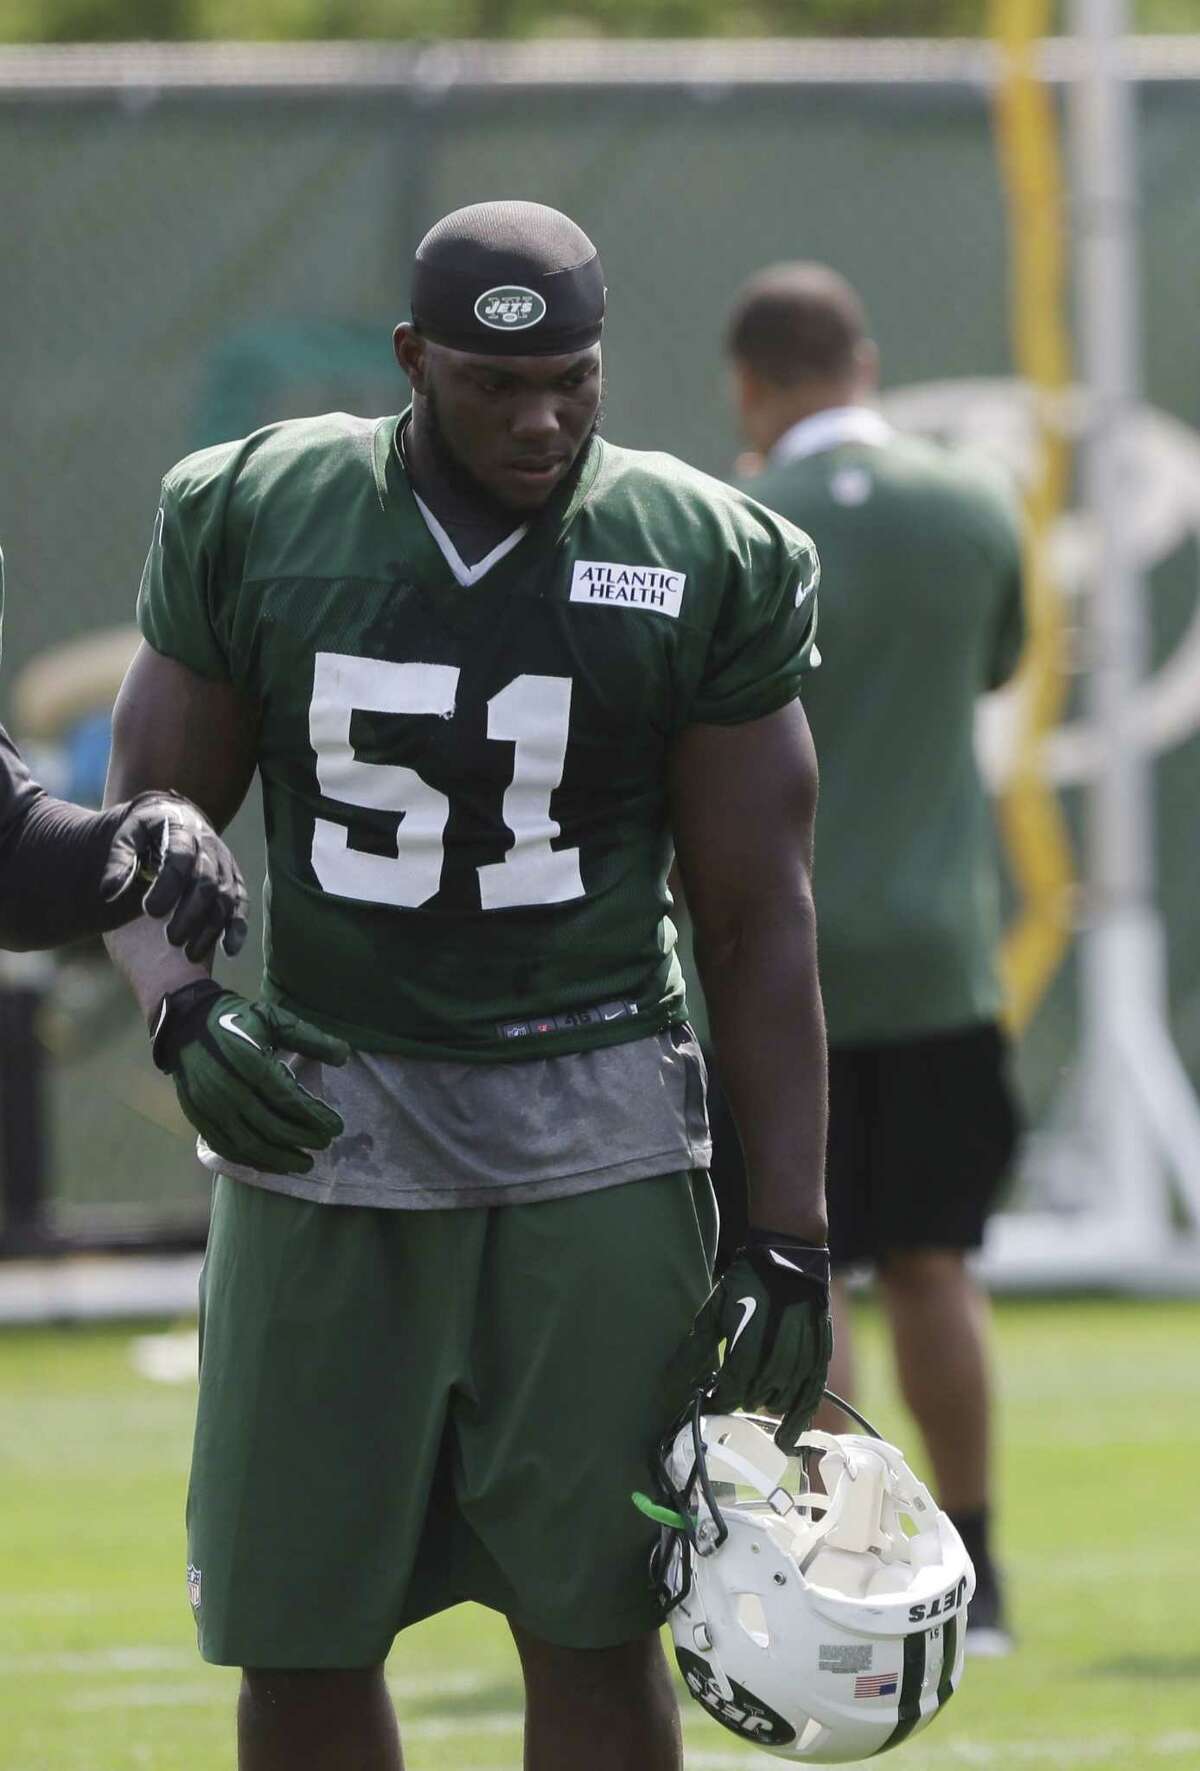 Without mentioning Geno Smith, Enemkpali says he's sorry